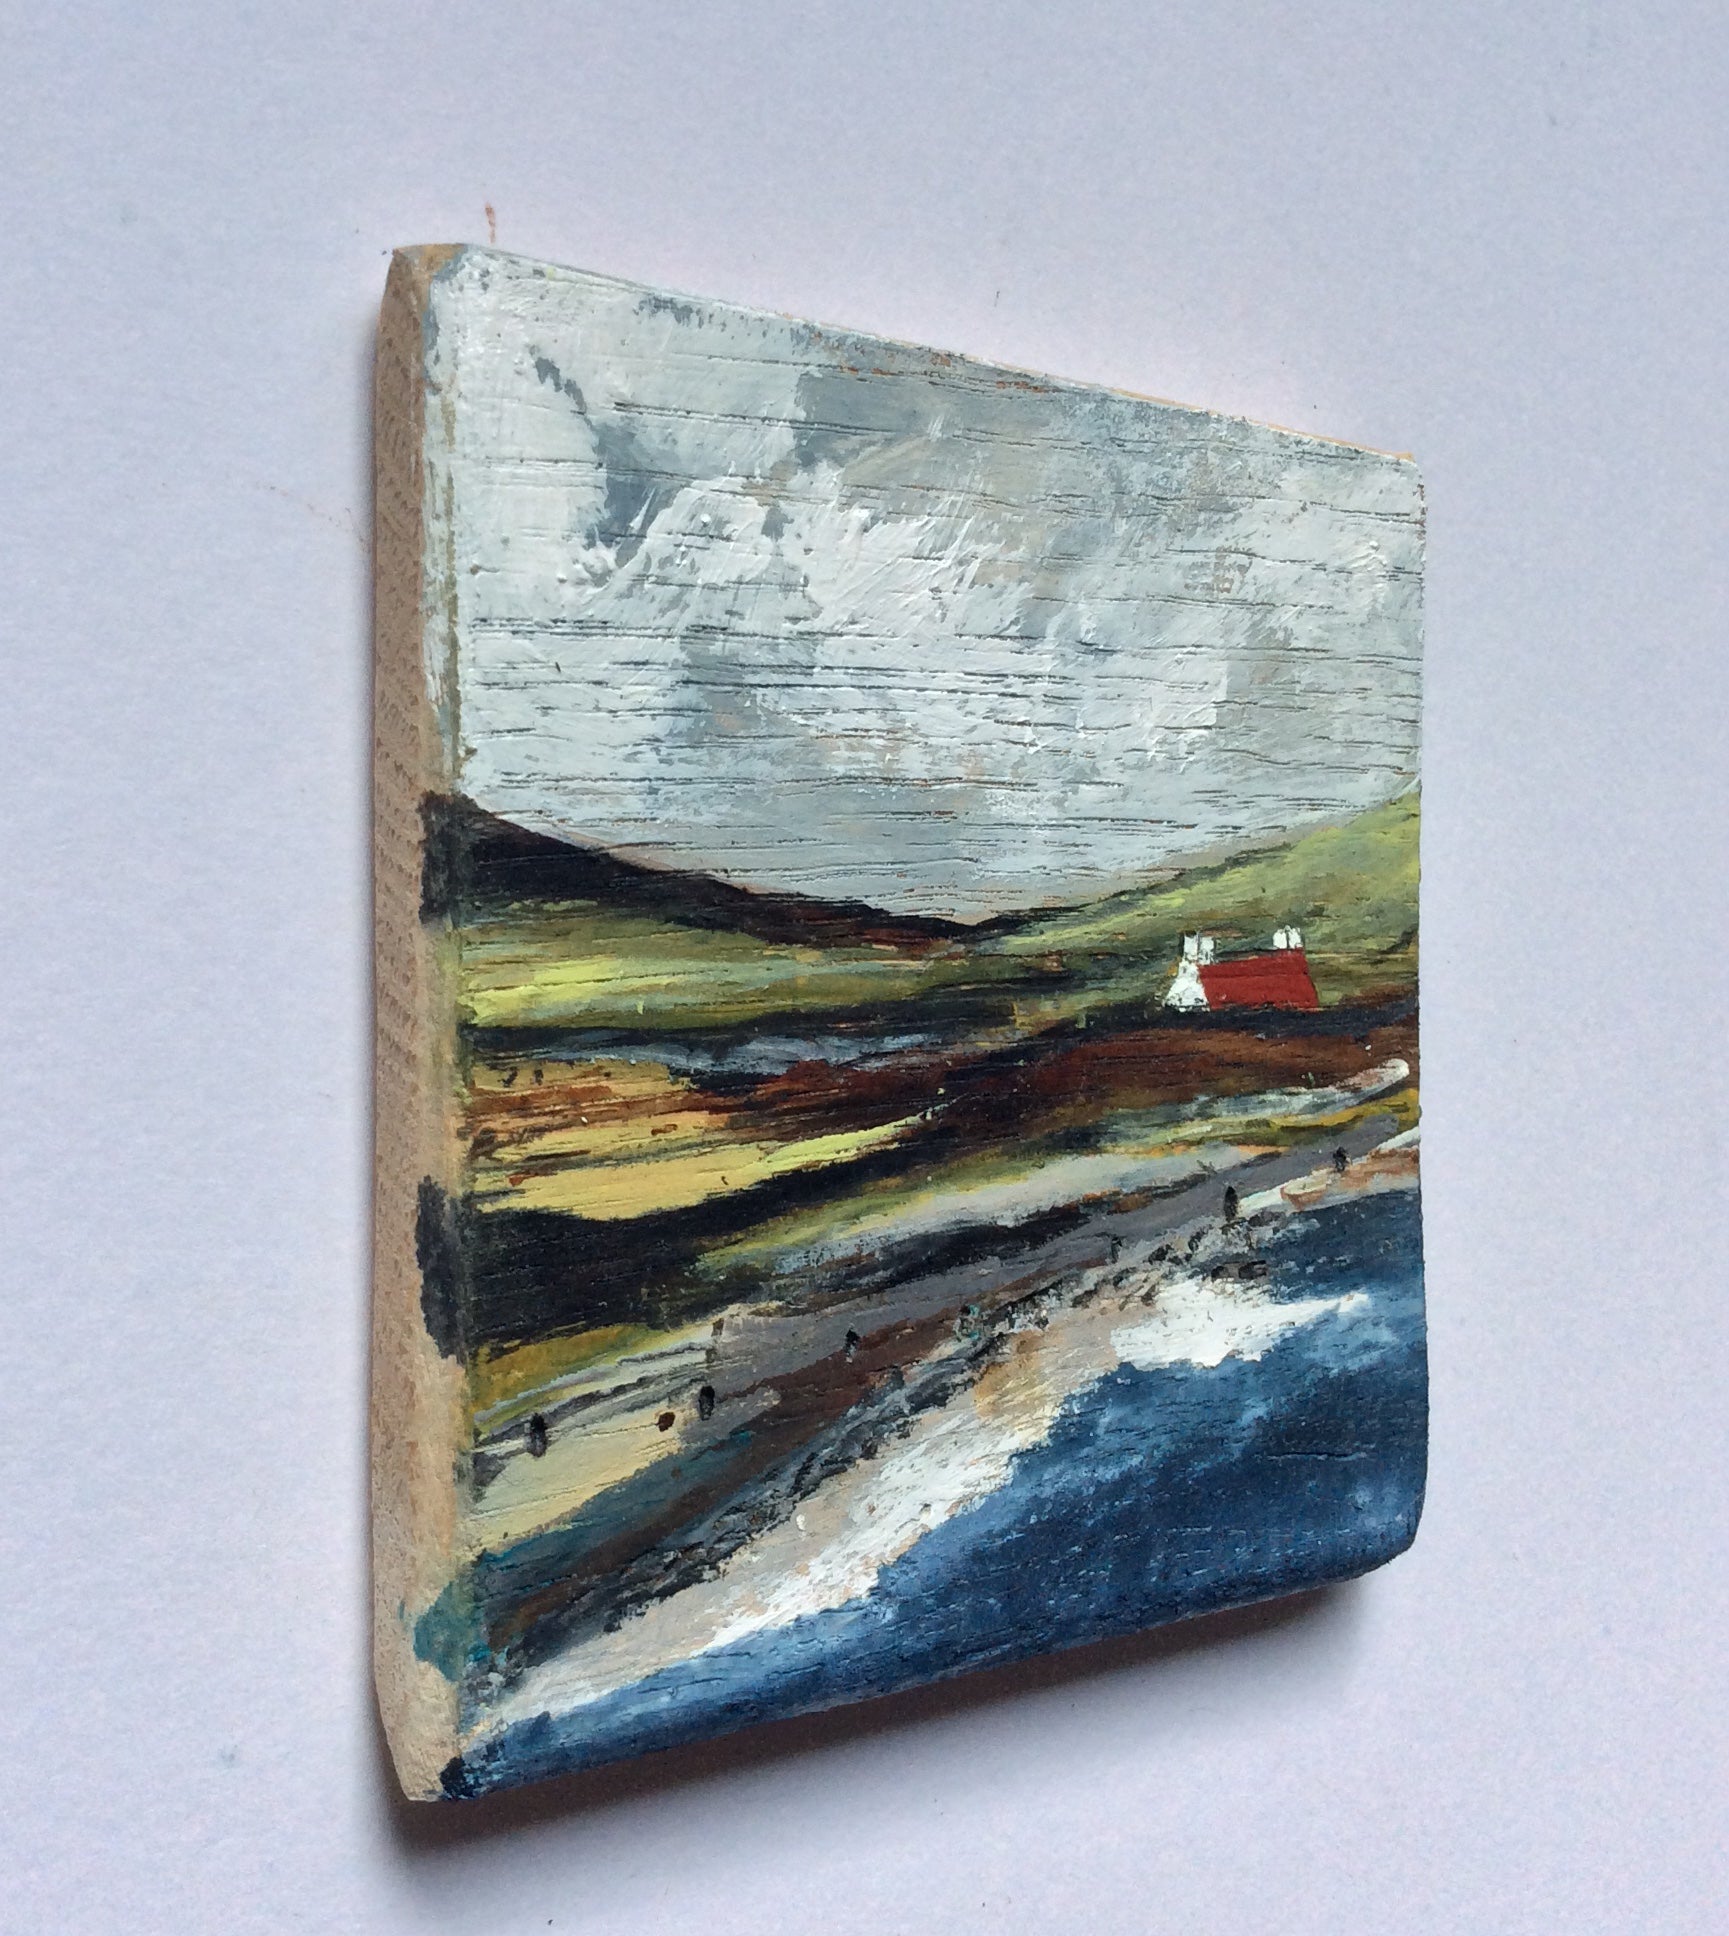 Mixed Media Art on wood By Louise O'Hara - "The sound of the waves”